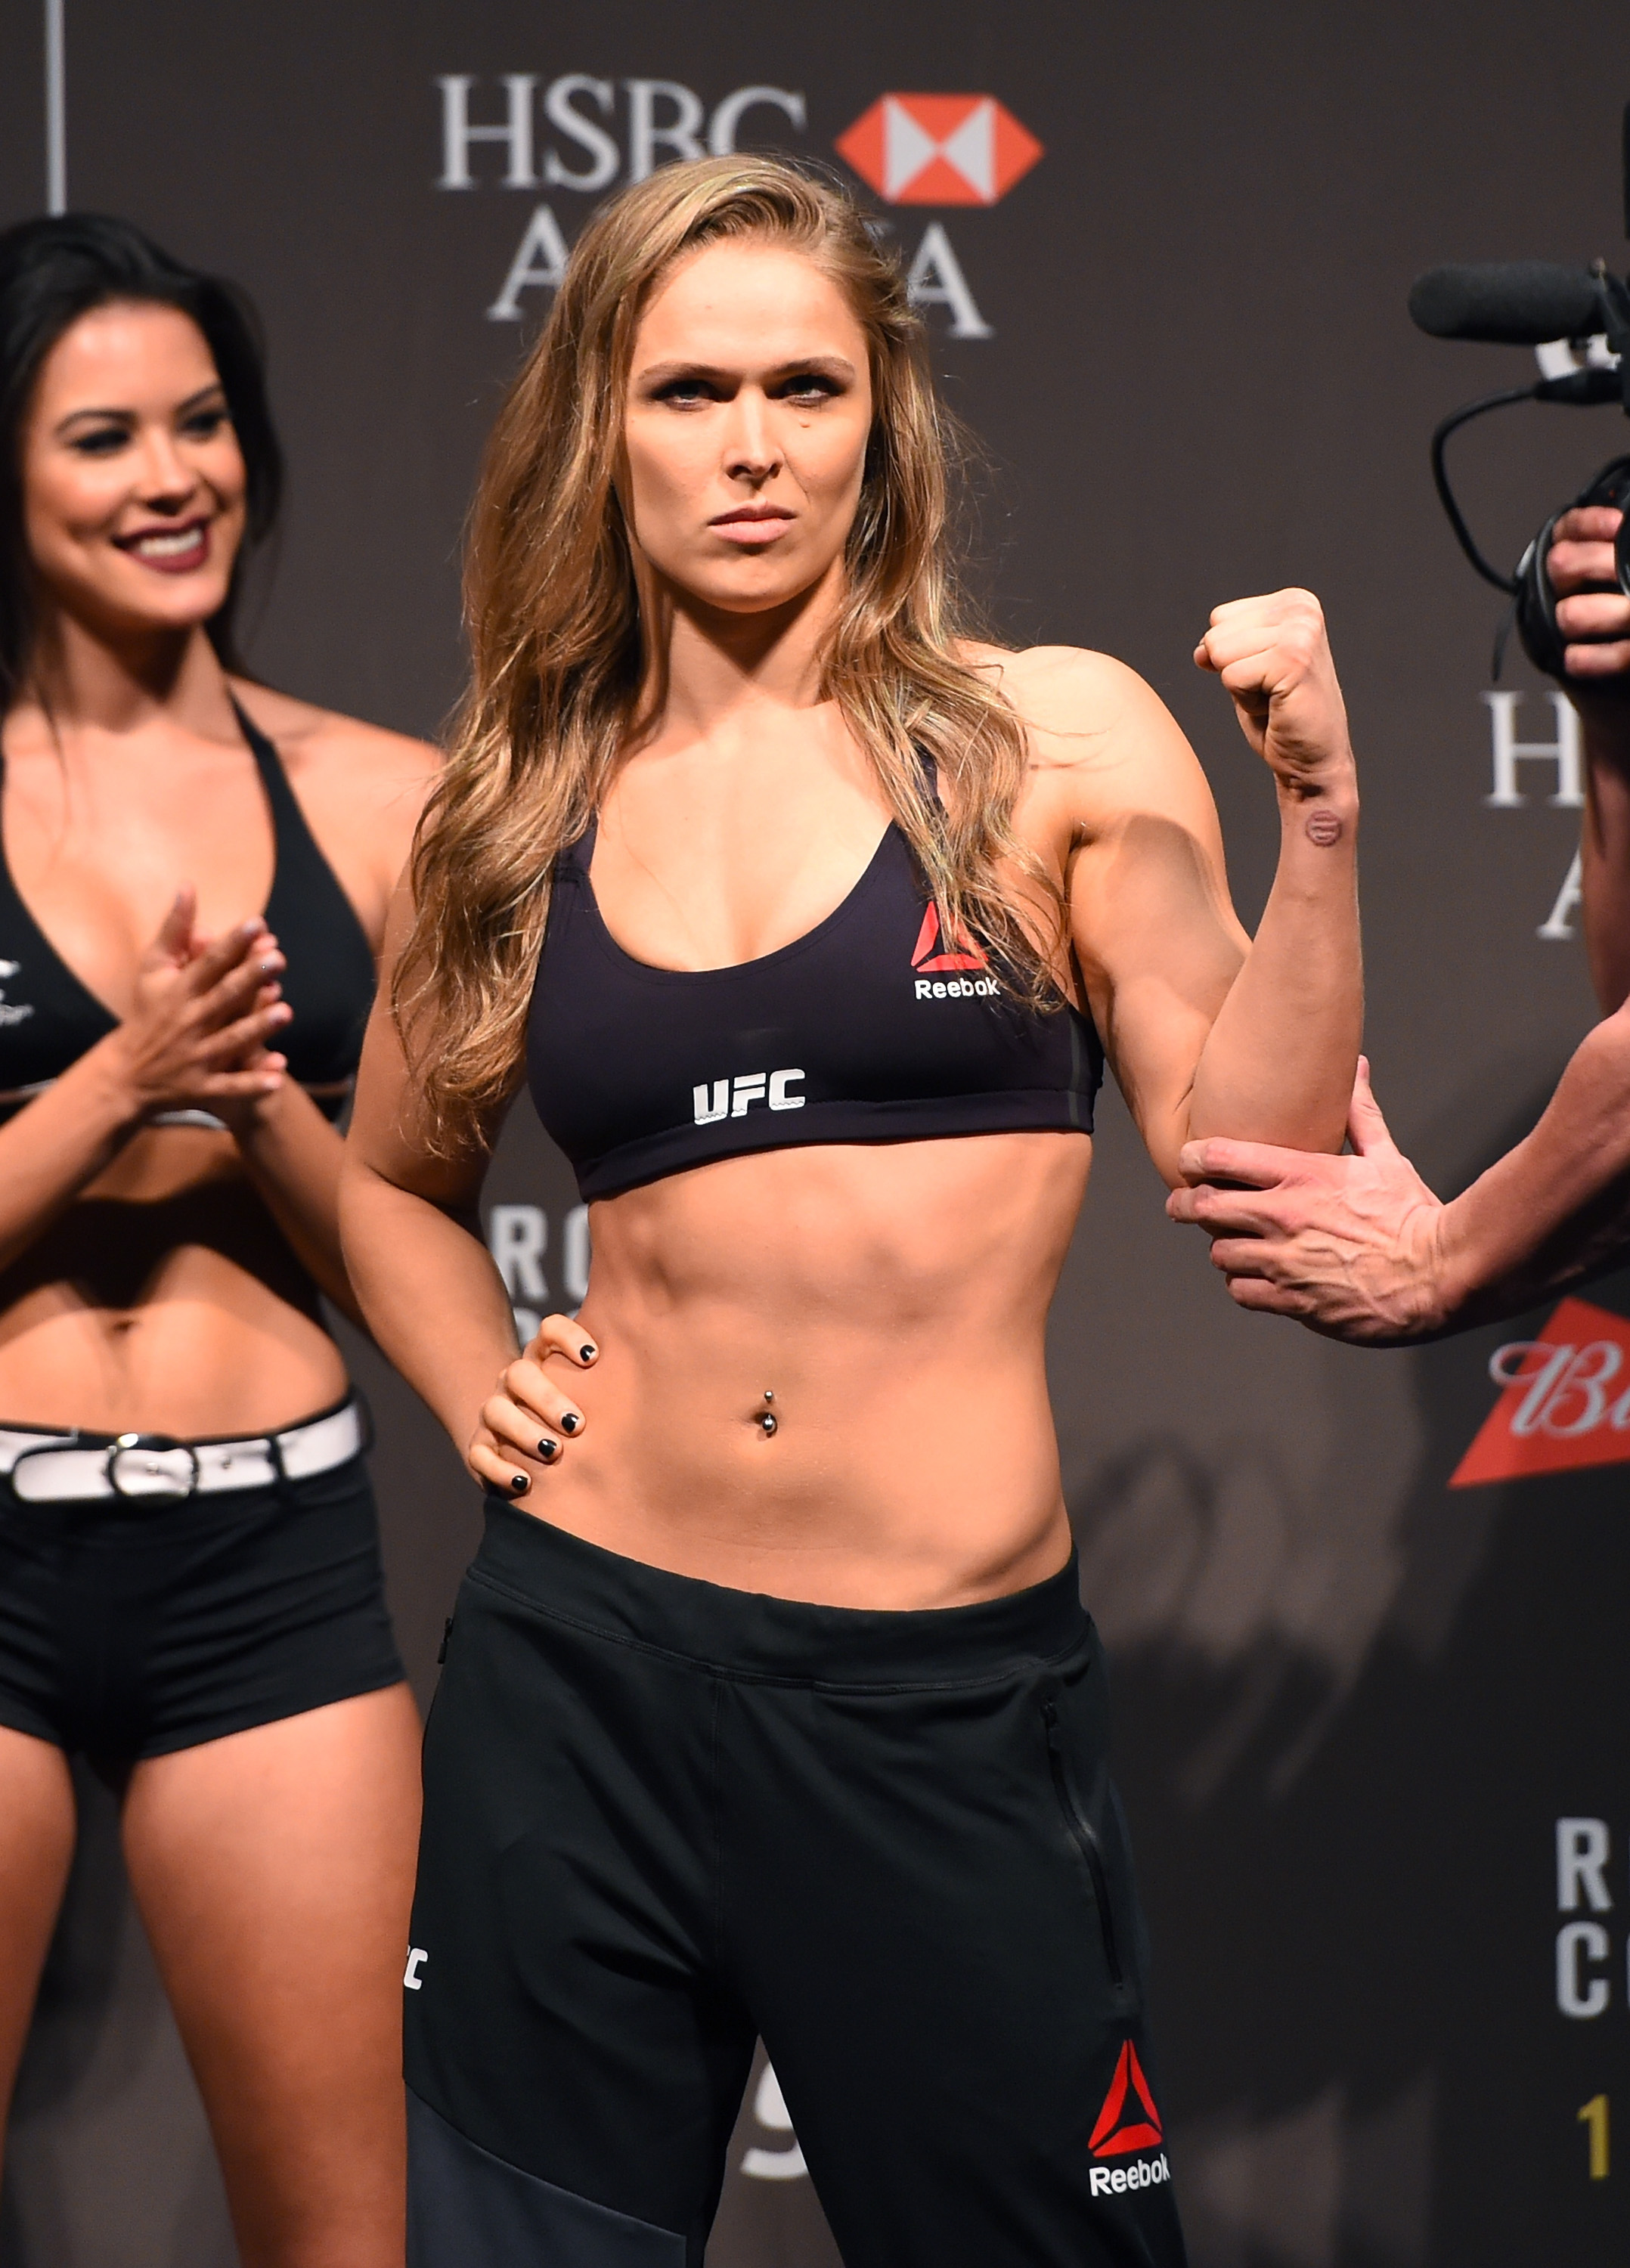 Ronda Rousey shapes up for a fight in Brazil.